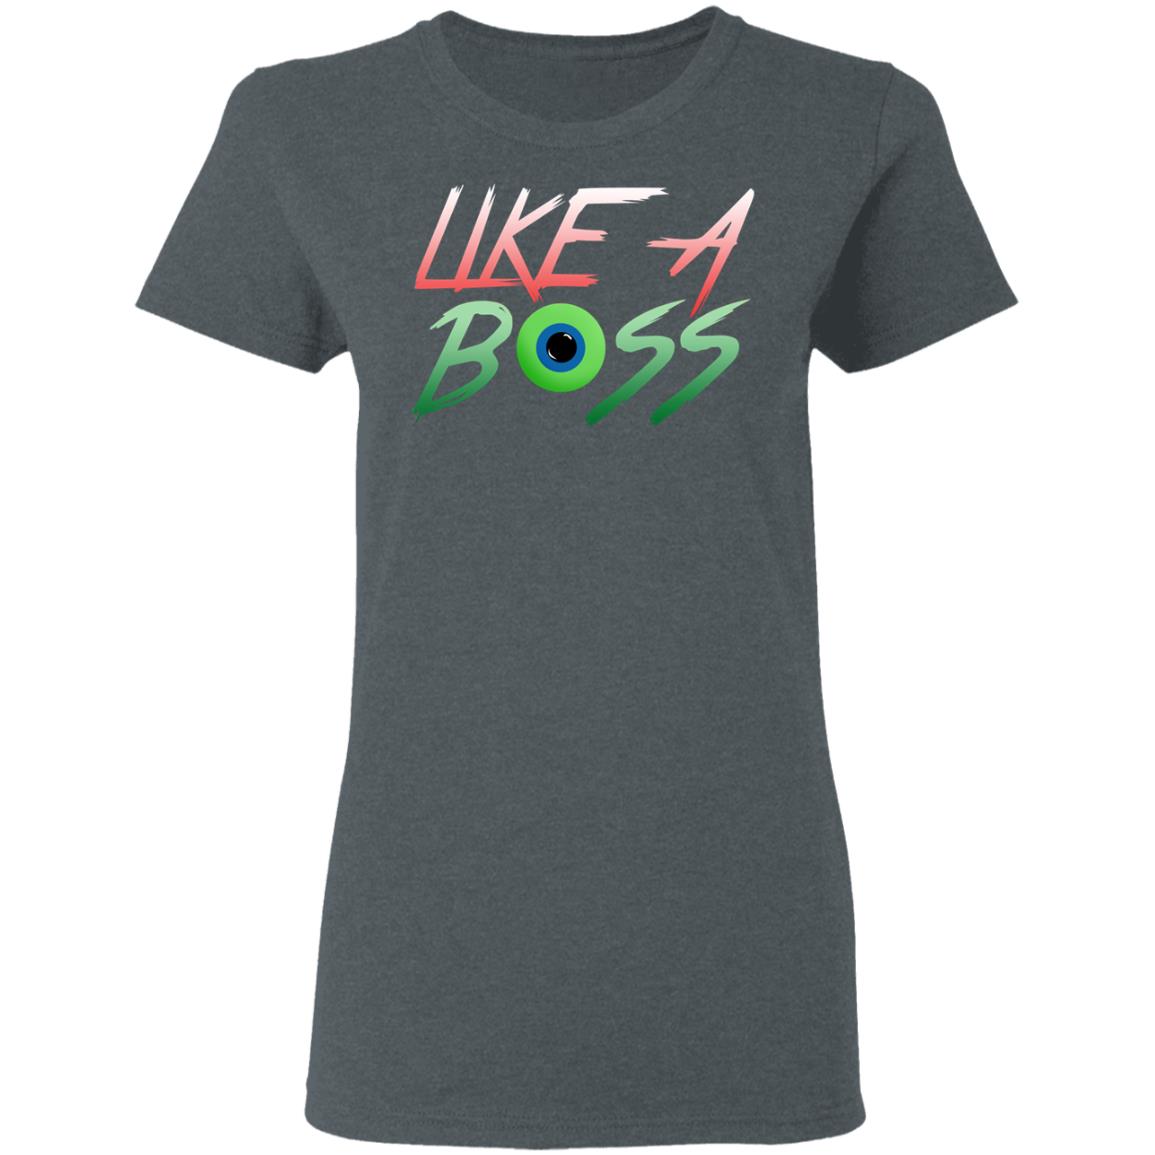 GAME ALL SIZES GREAT GIFT JACKSEPTICEYE WHITE T-SHIRT FIGURE LIKE A BOSS 